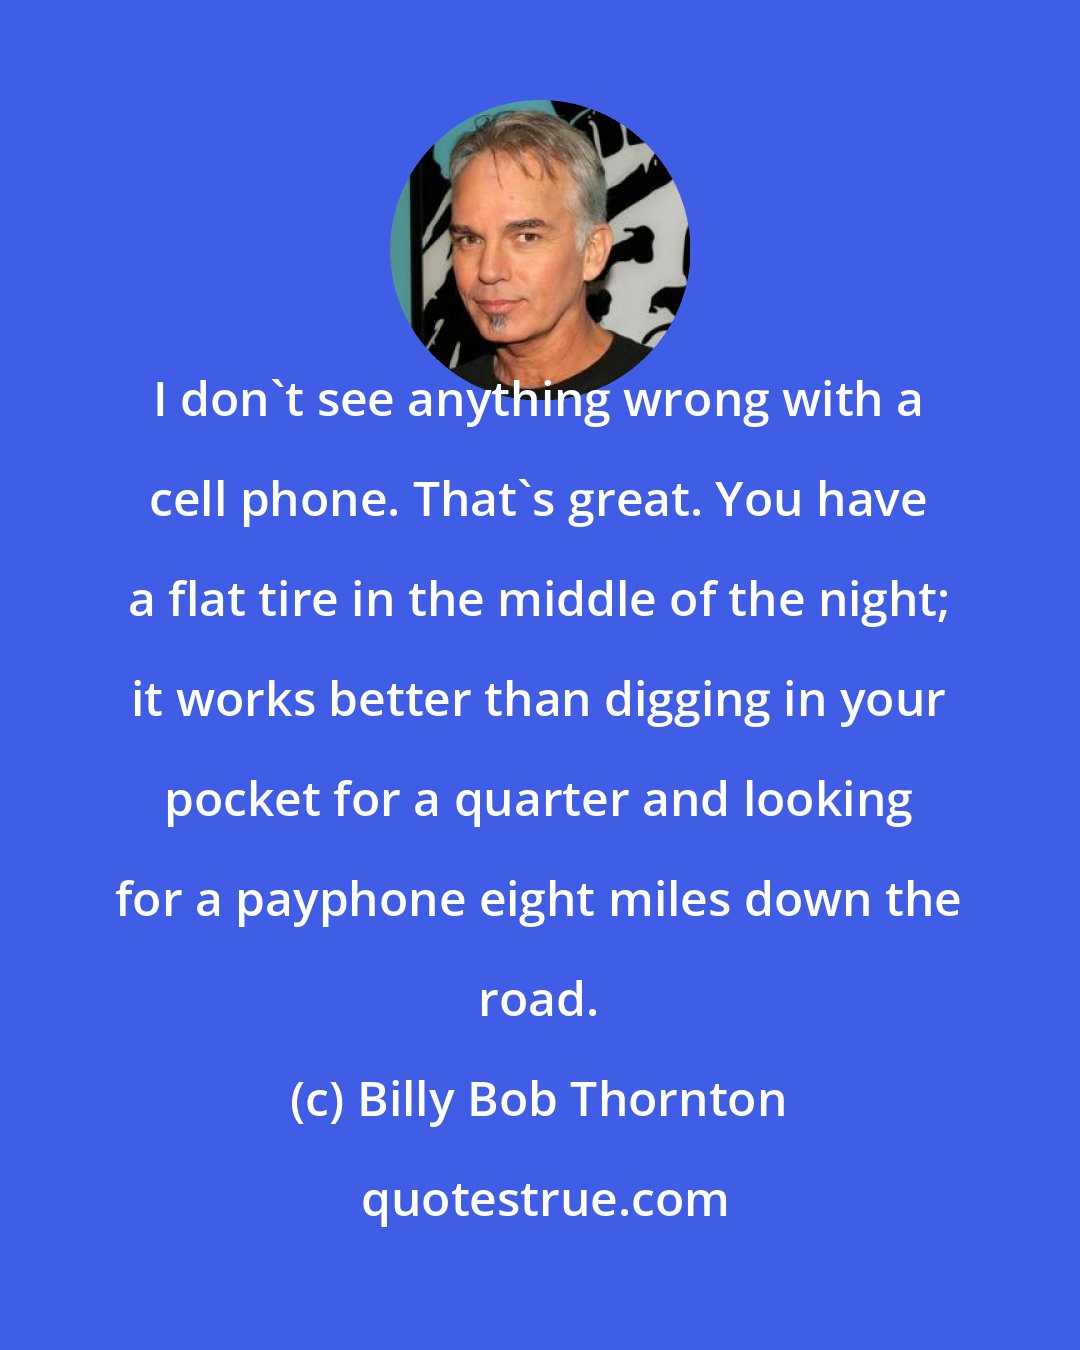 Billy Bob Thornton: I don't see anything wrong with a cell phone. That's great. You have a flat tire in the middle of the night; it works better than digging in your pocket for a quarter and looking for a payphone eight miles down the road.